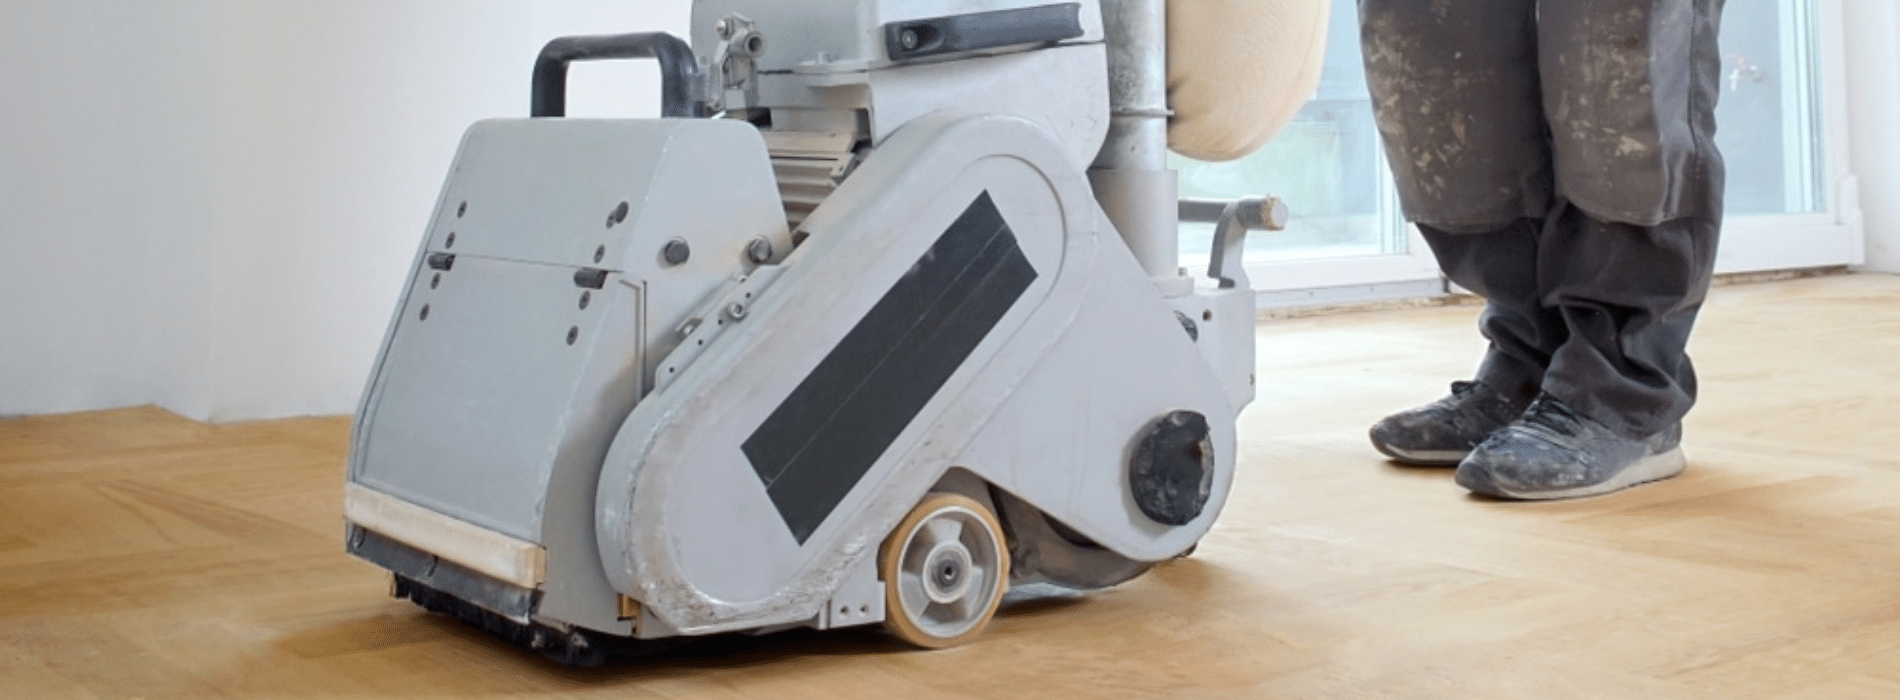 In South Tottenham, N15, Mr Sander® use a Bona Scorpion drum sander, measuring 200 mm and operating at 1.5 kW with a voltage of 240 V and frequency of 50 Hz. They connect it to a dust extraction system equipped with a HEPA filter for a thorough and effective sanding process.